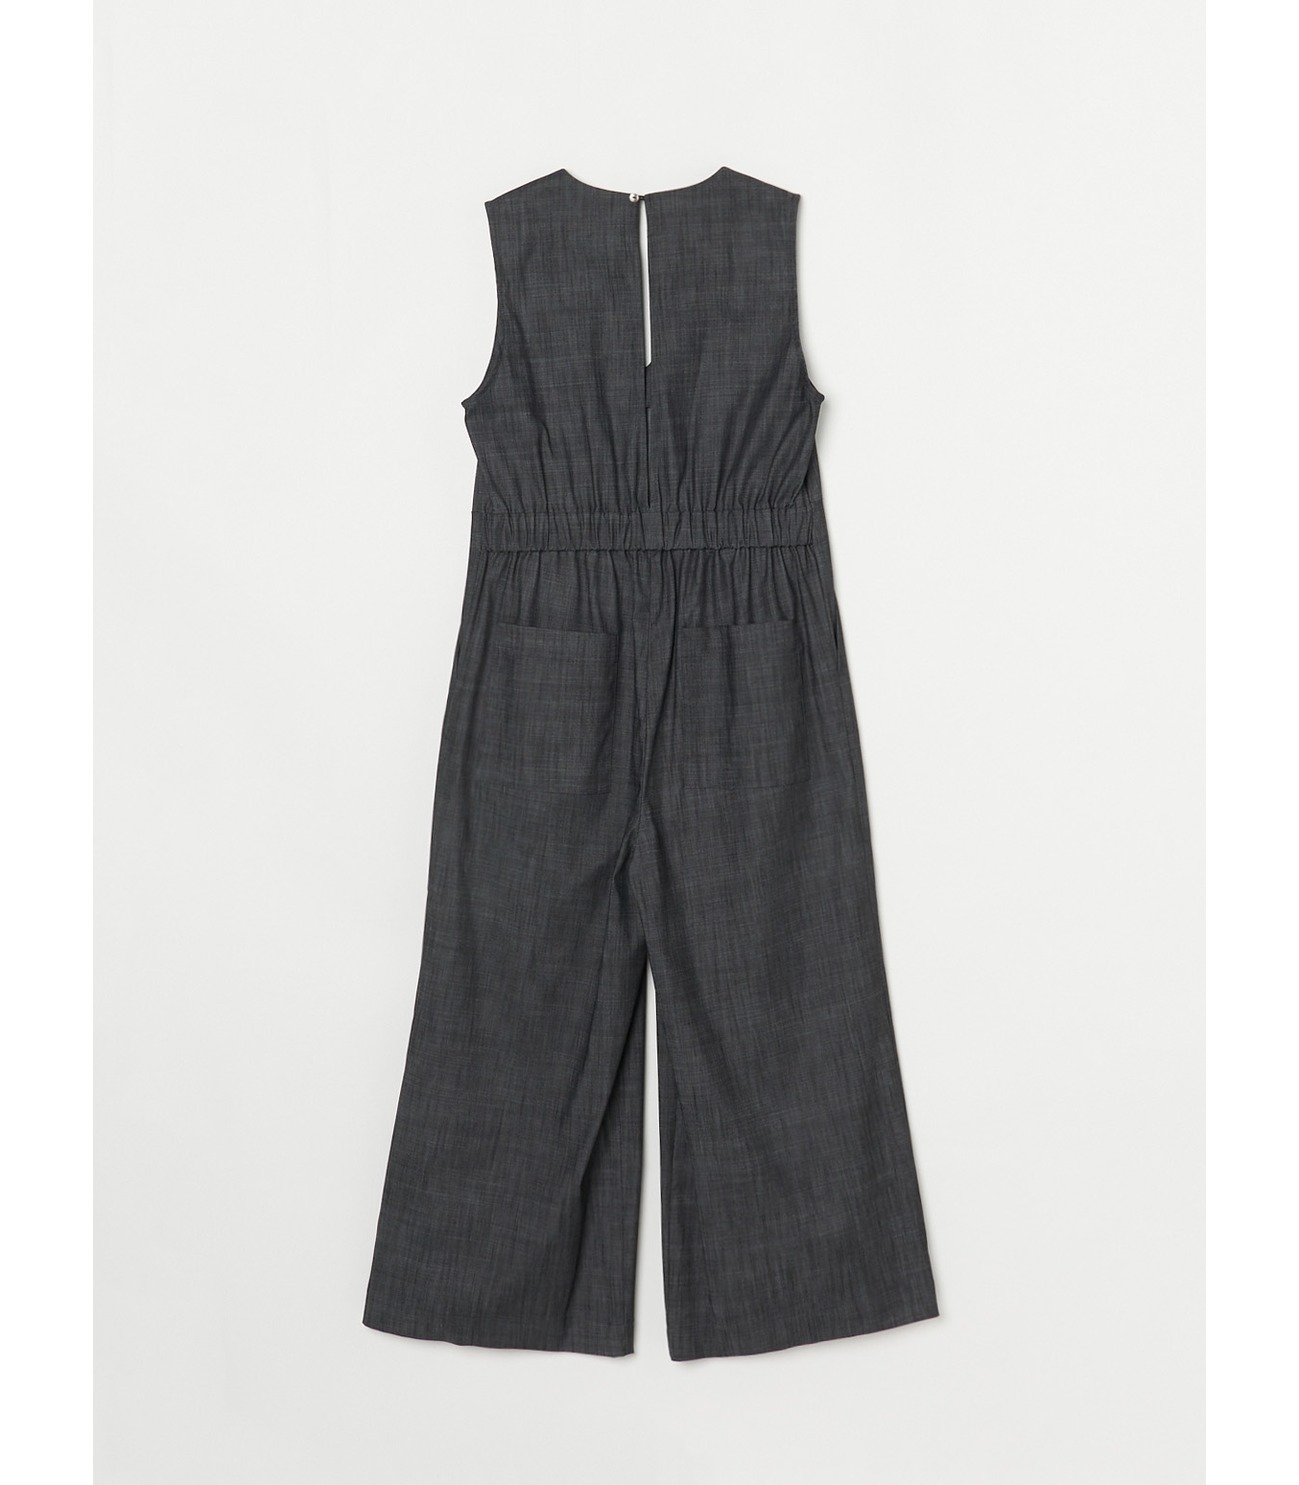 Dungaree all in one 詳細画像 black 1